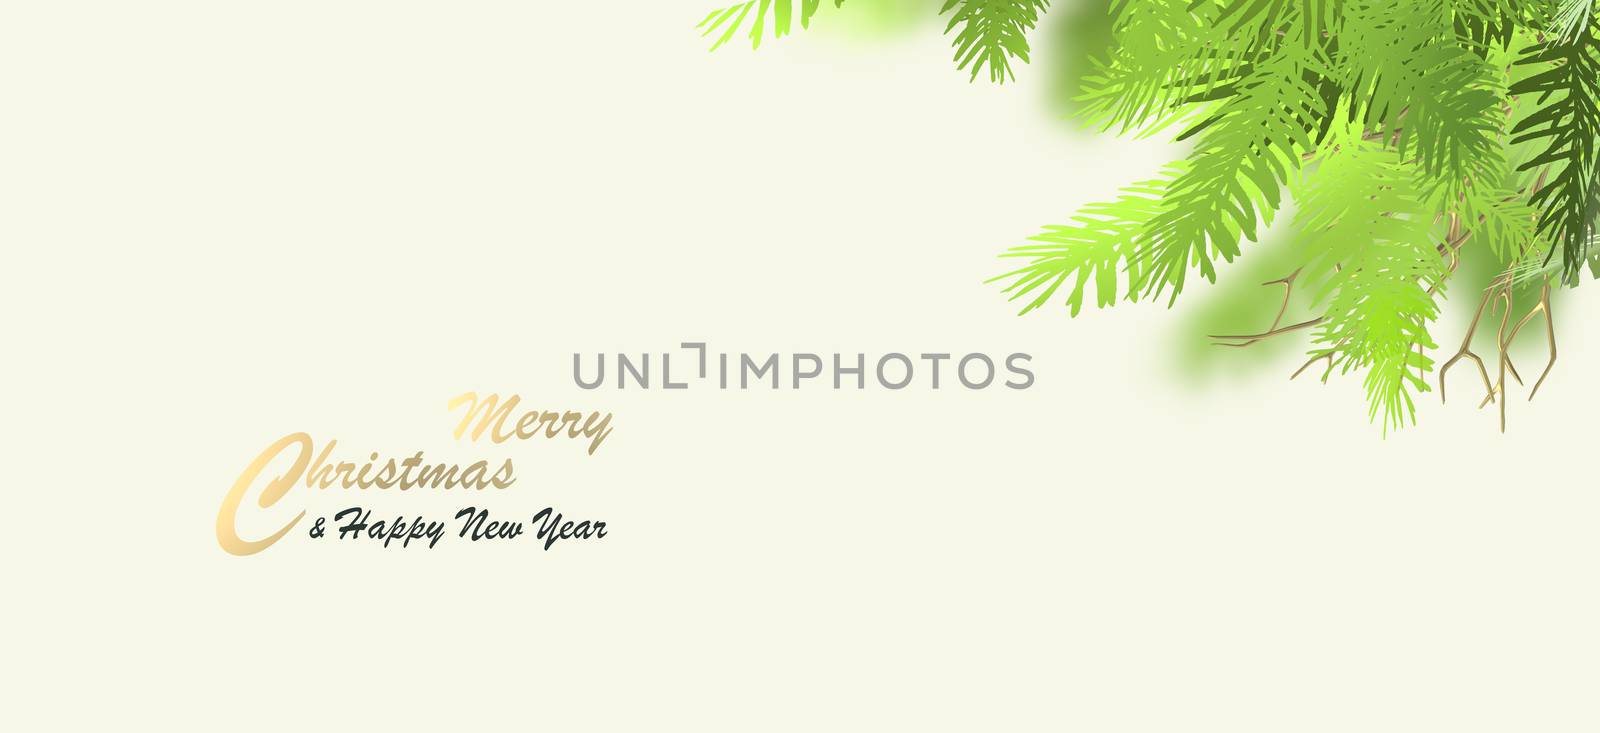 Christmas holiday background. Minimalist Xmas banner with Xmas fir branches, gold tree, shiny text Merry Christmas Happy New Year on white yellow pastel background. Place for text, copy space. 3D render